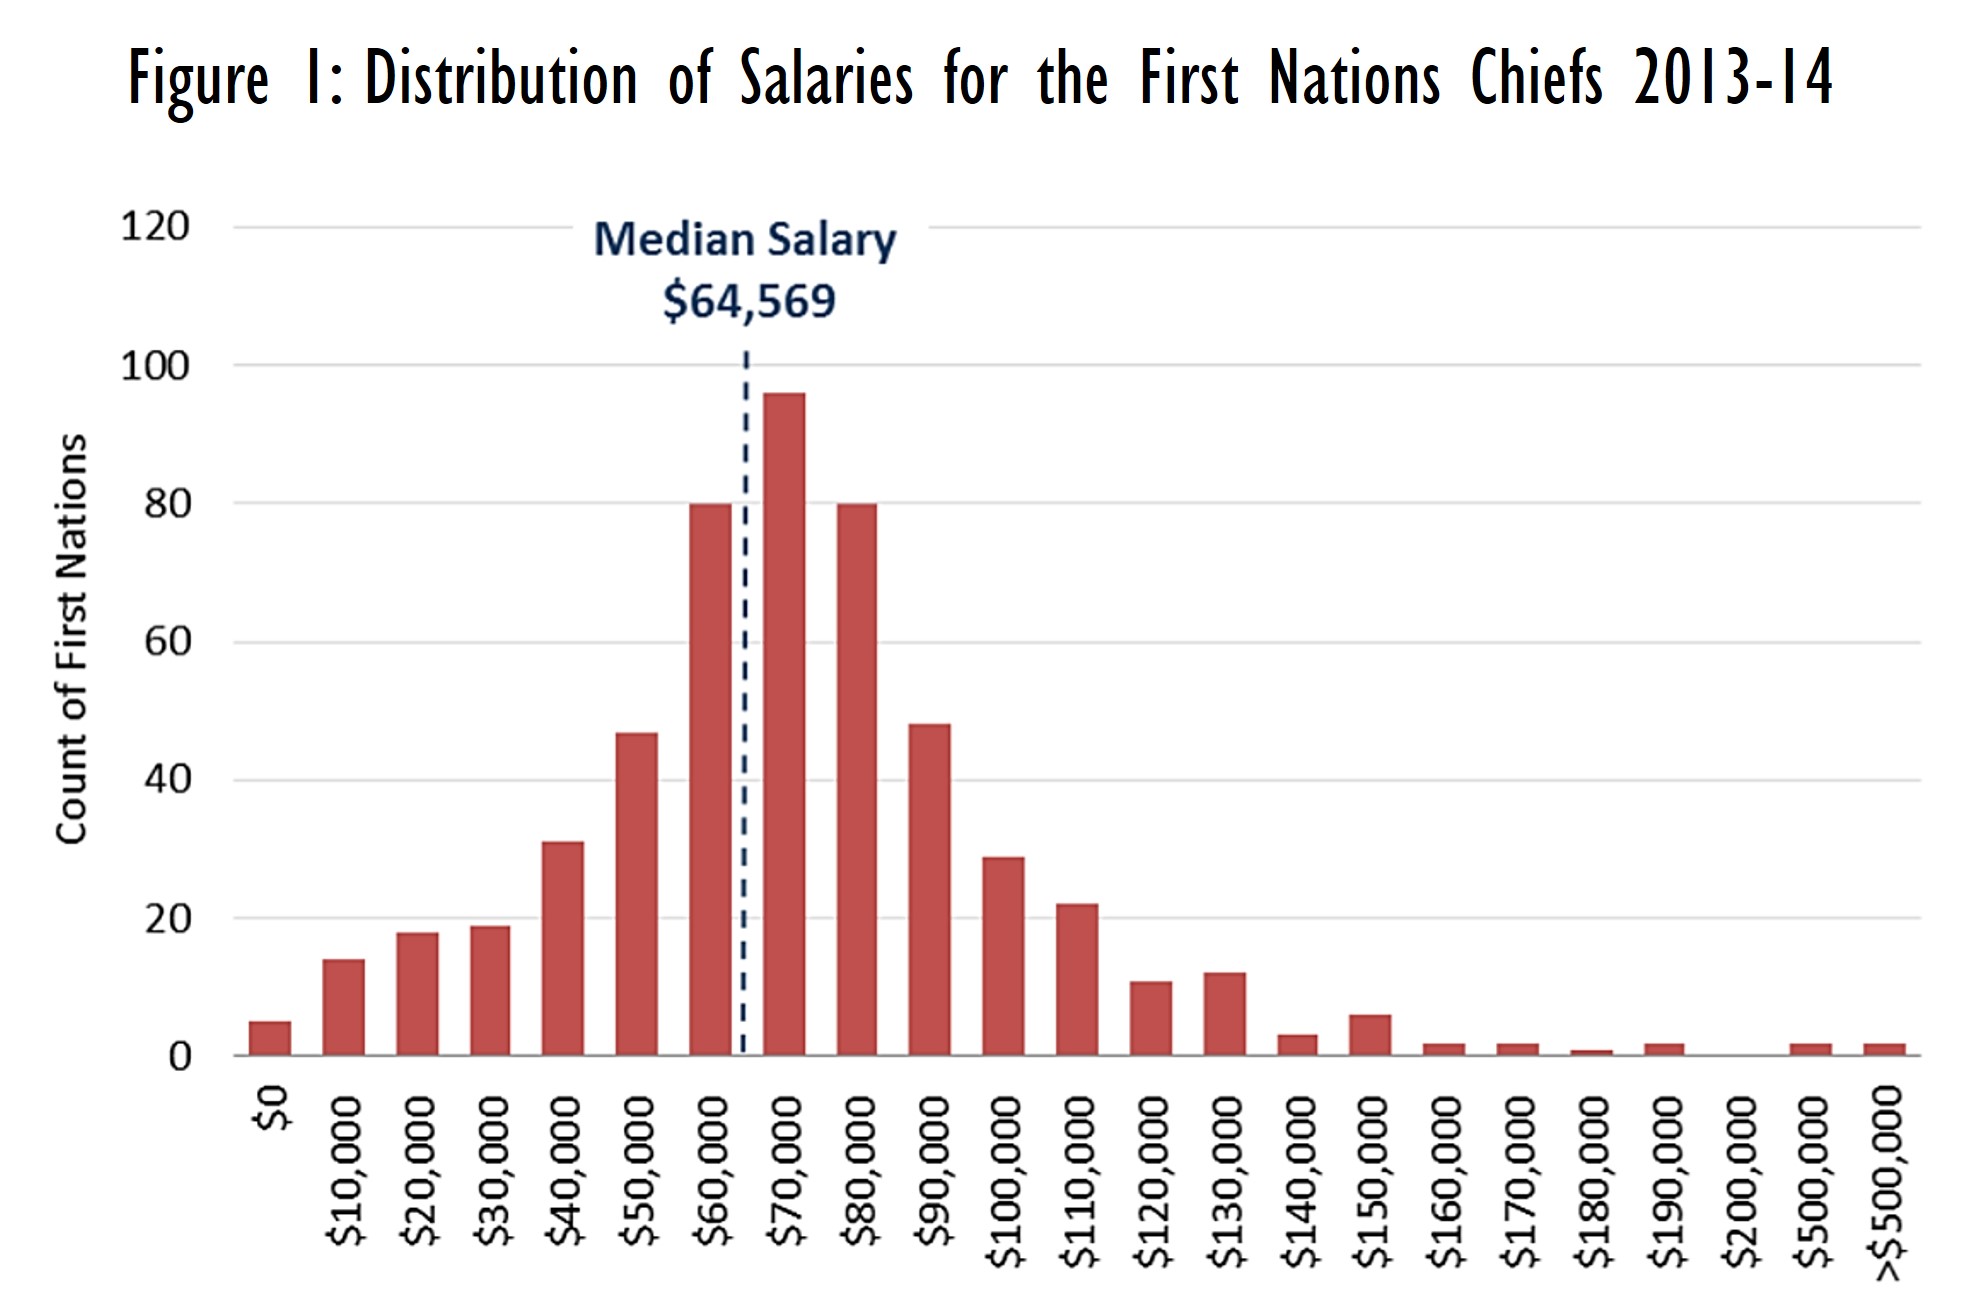 This bar chart has the number of First Nations on the vertical axis and salary, apparently rounded to the nearest $10,000, on the horizontal axis. The bars form a somewhat normal or bell-shaped distribution, with most First Nations Chiefs having salaries between $30,000 and $100,000 per year. The distribution is thicker below $30,000 compared to a thin, strung-out tail on the high end. The median salary was $64,659 and the mode was in the $70,000 range. About 4 chiefs earned $0 and 2 earned over $500,000.